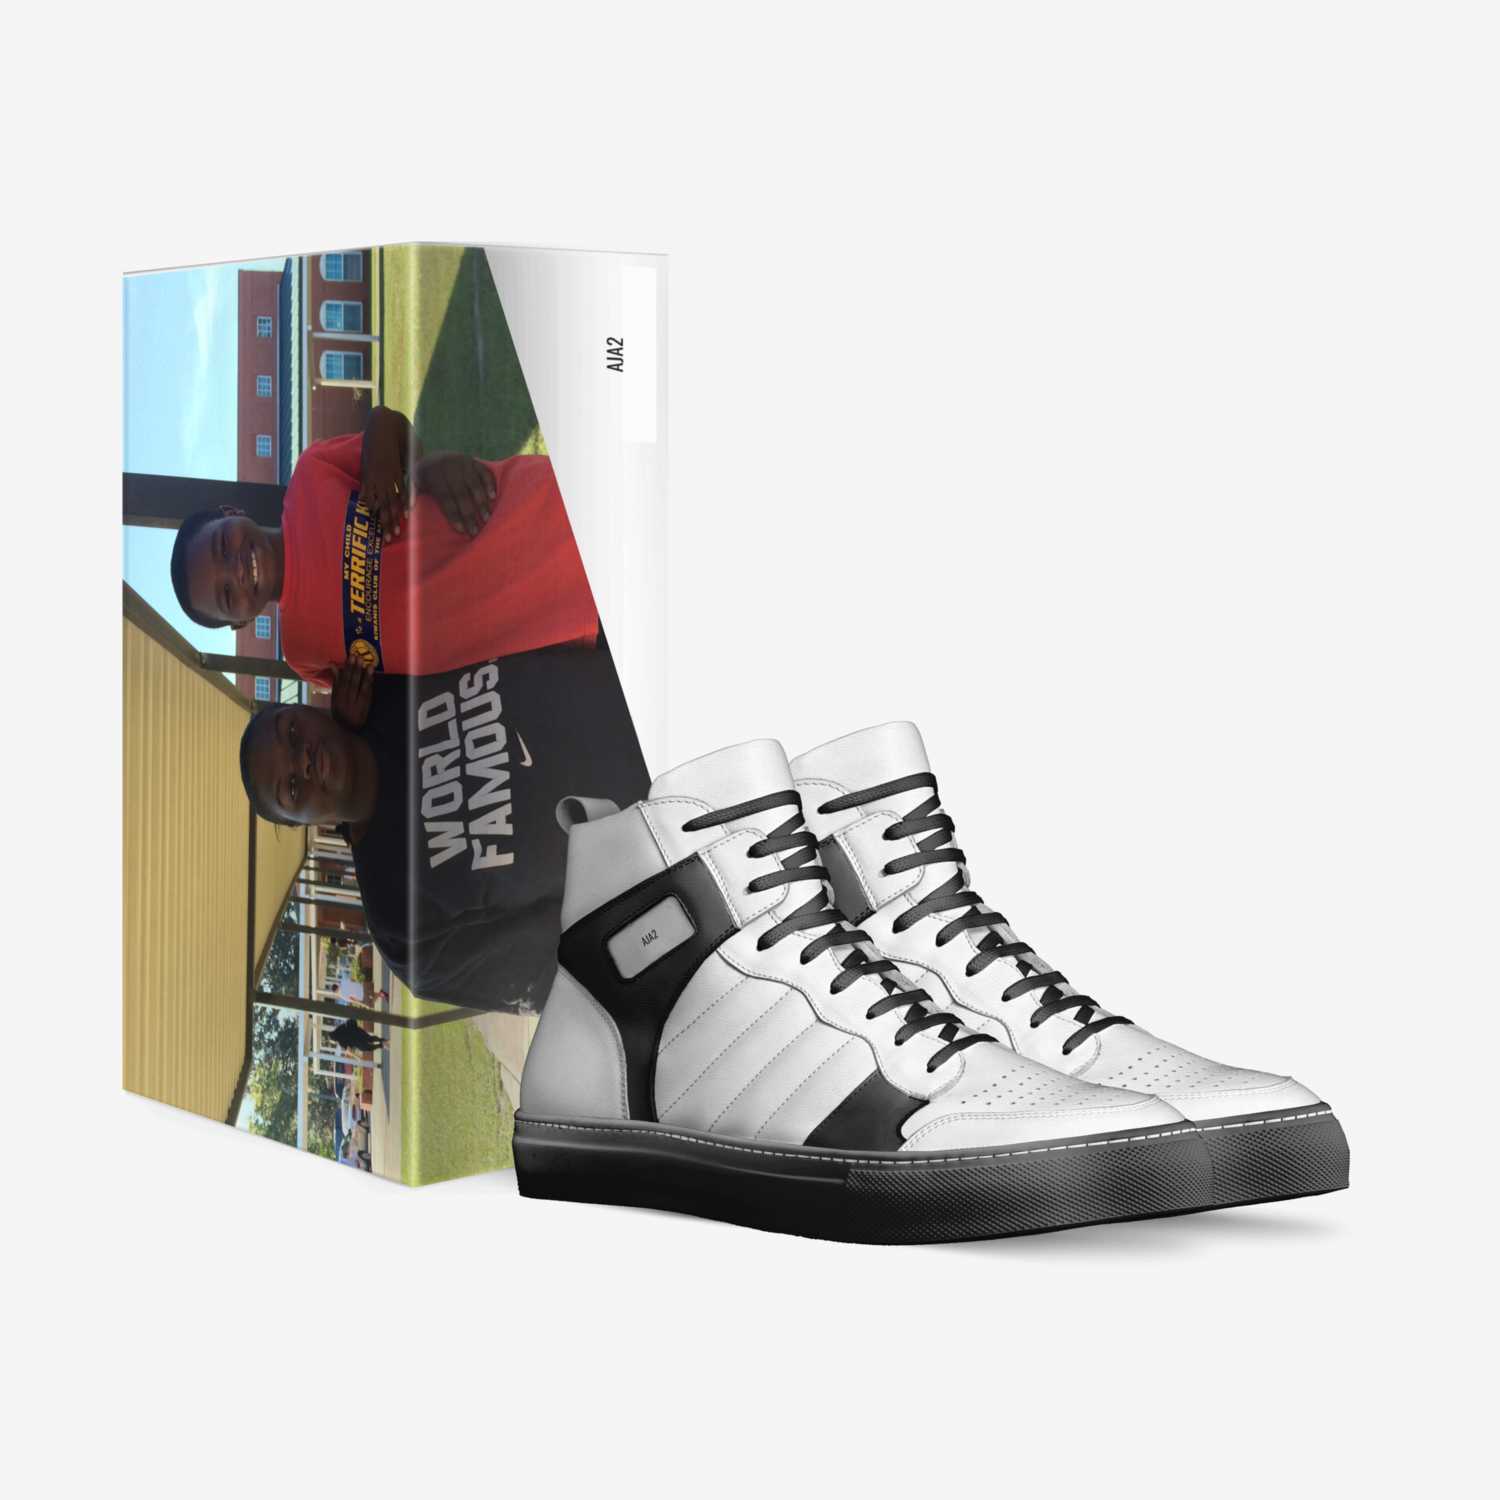 Aja2 custom made in Italy shoes by Andrealston | Box view